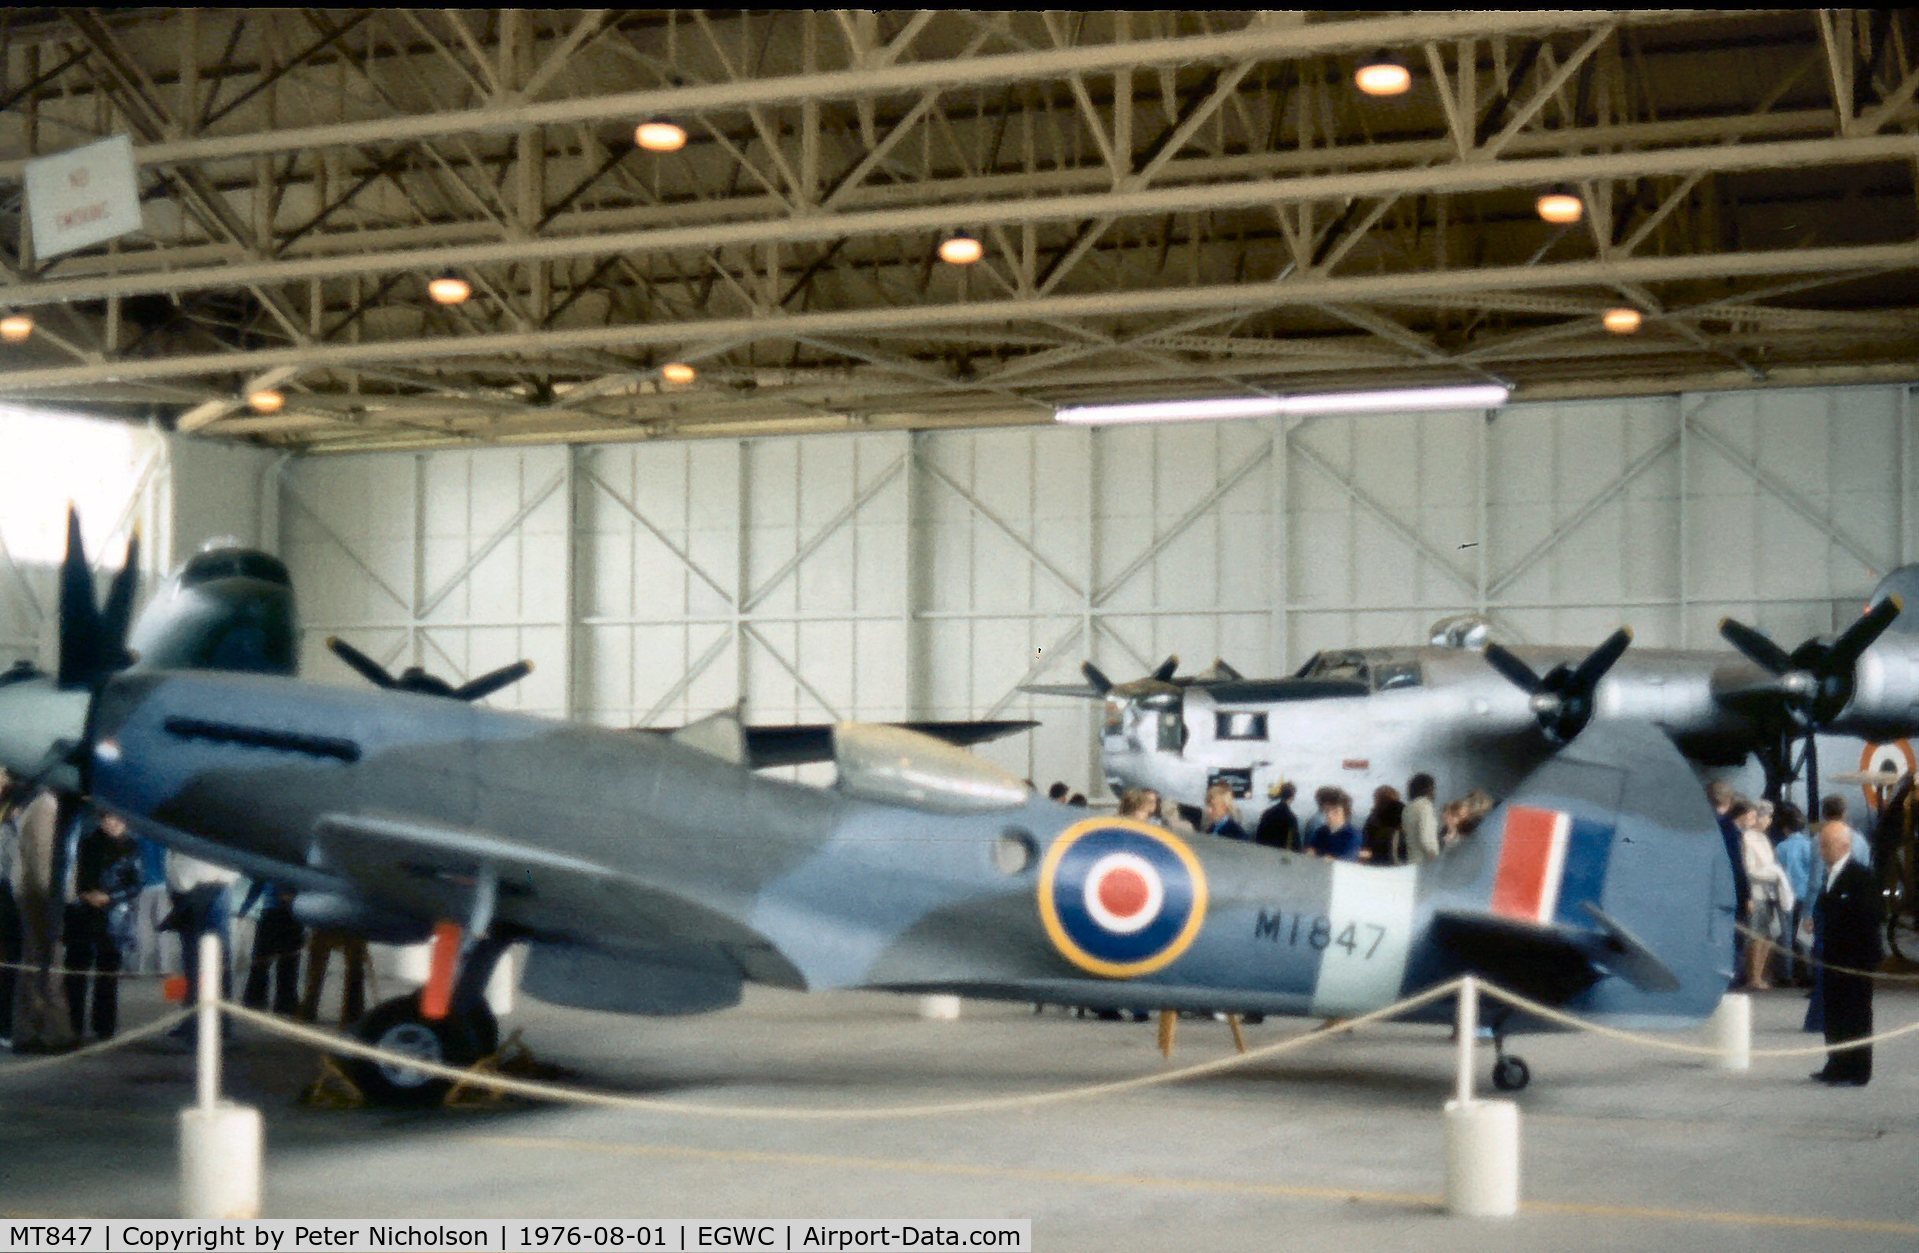 MT847, Supermarine 379 Spitfire FR.XIVe C/N 6S/643779, Another view of Cosford's Spitfire FR.XIVe as seen in the Summer of 1976.